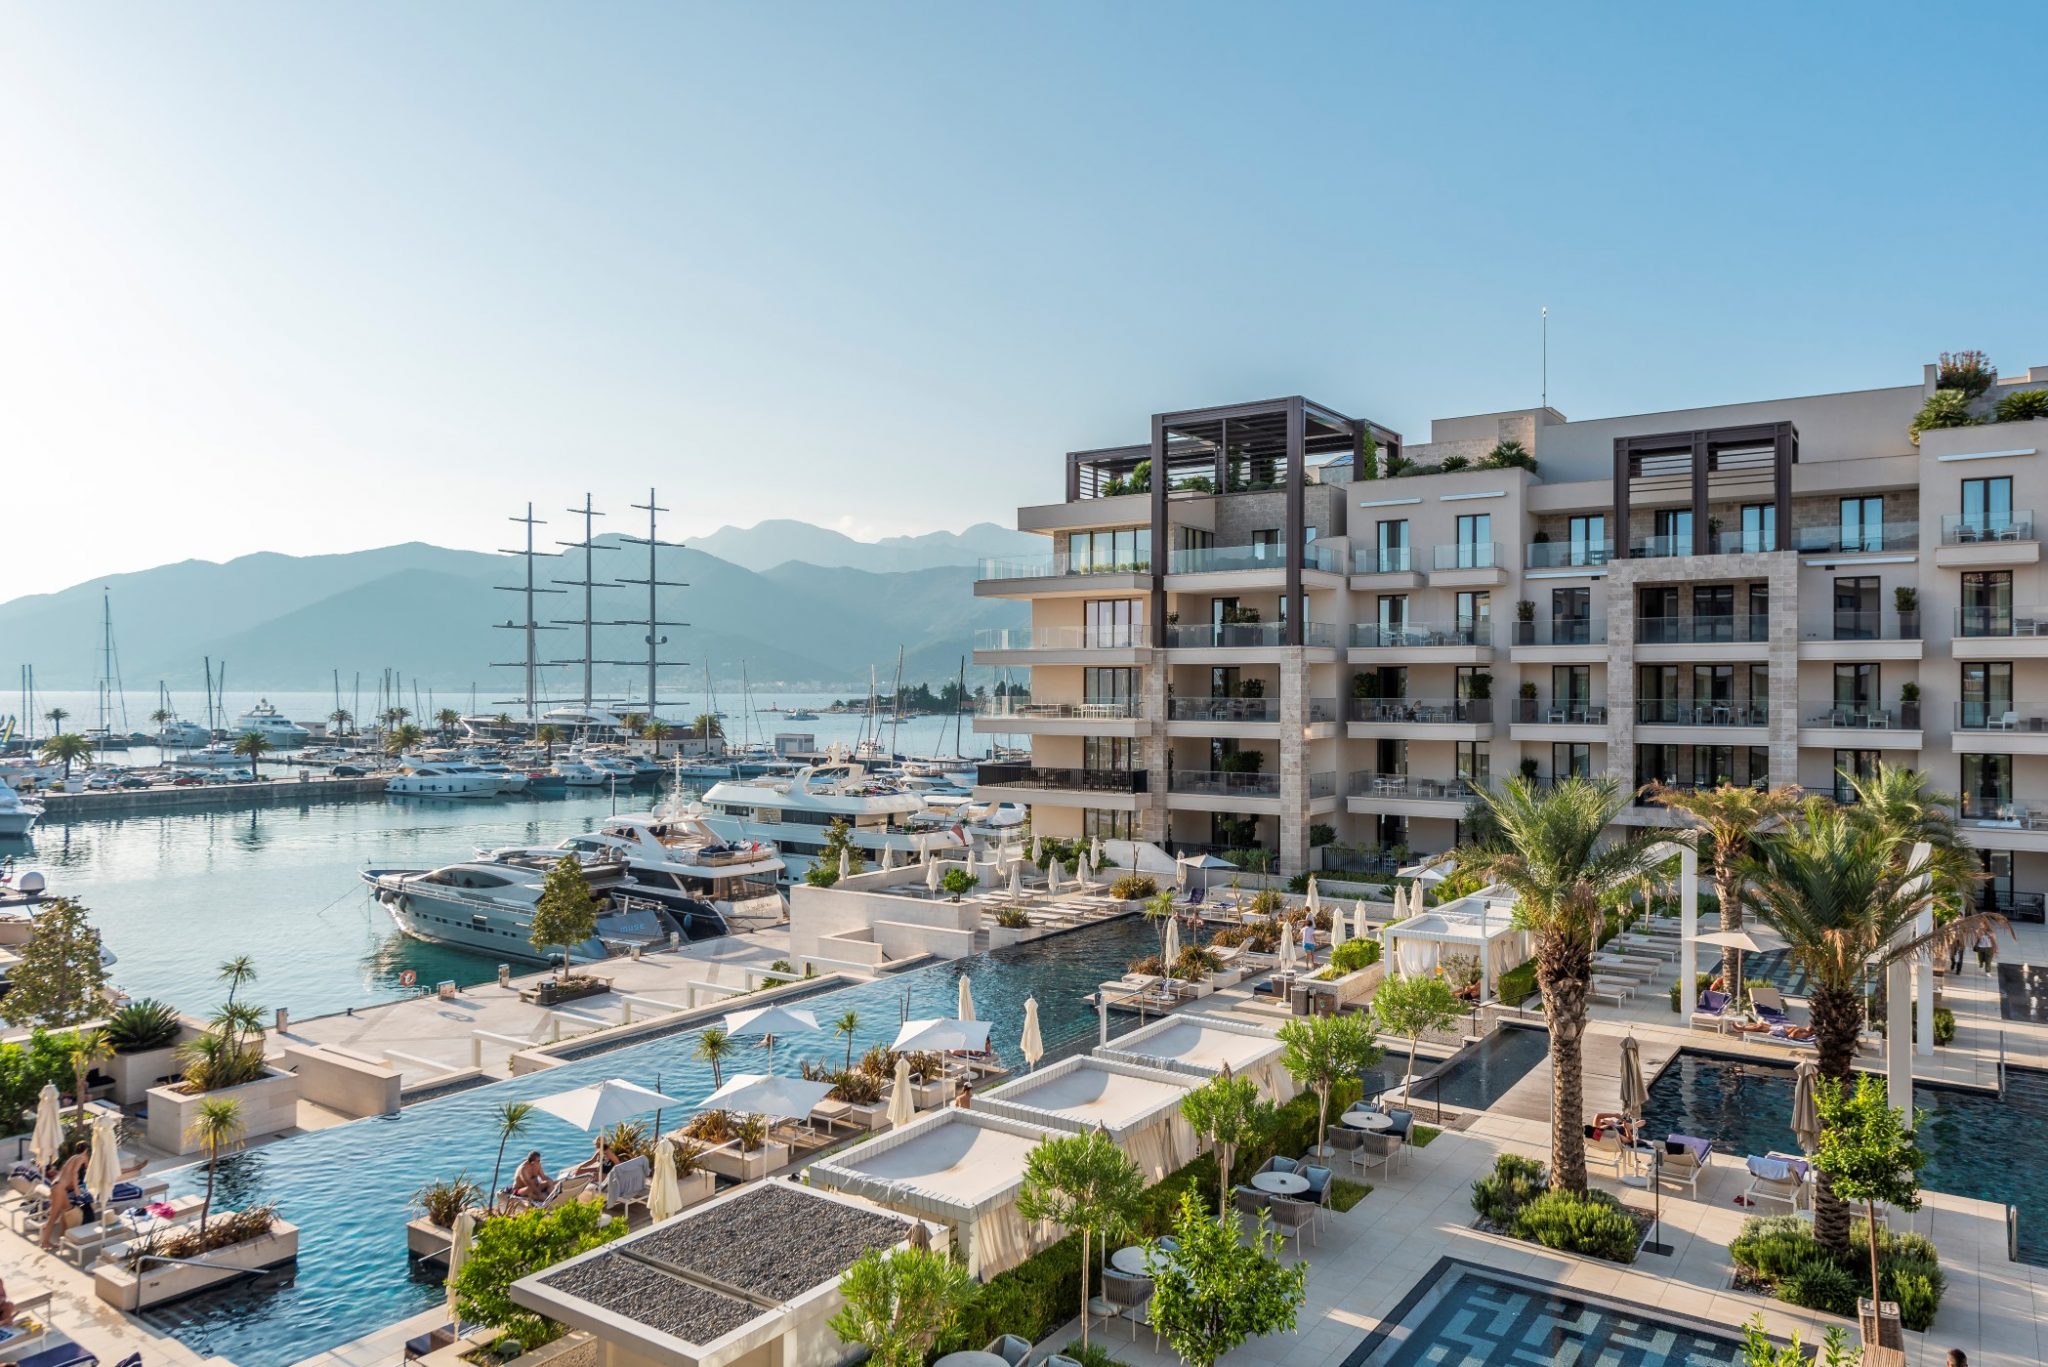 Tivat, Porto Montenegro – one-bedroom apartment in Aqua building, with swimming pools and sea view